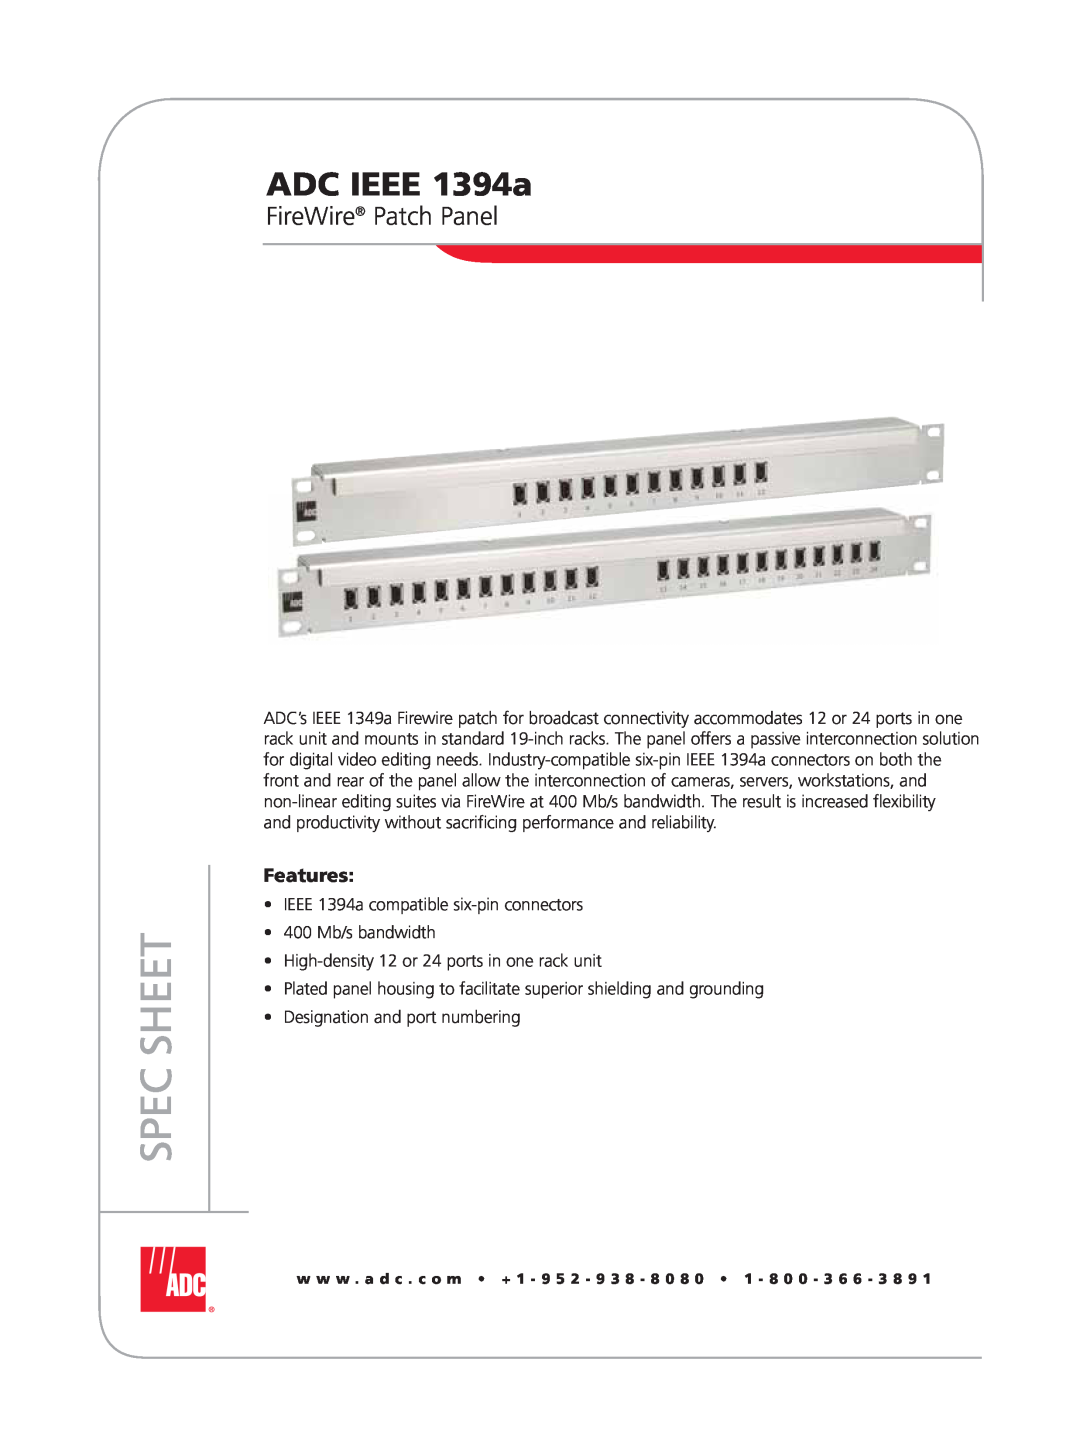 ADC manual Spec Sheet, ADC IEEE 1394a, FireWire Patch Panel, Features, High-density 12 or 24 ports in one rack unit 